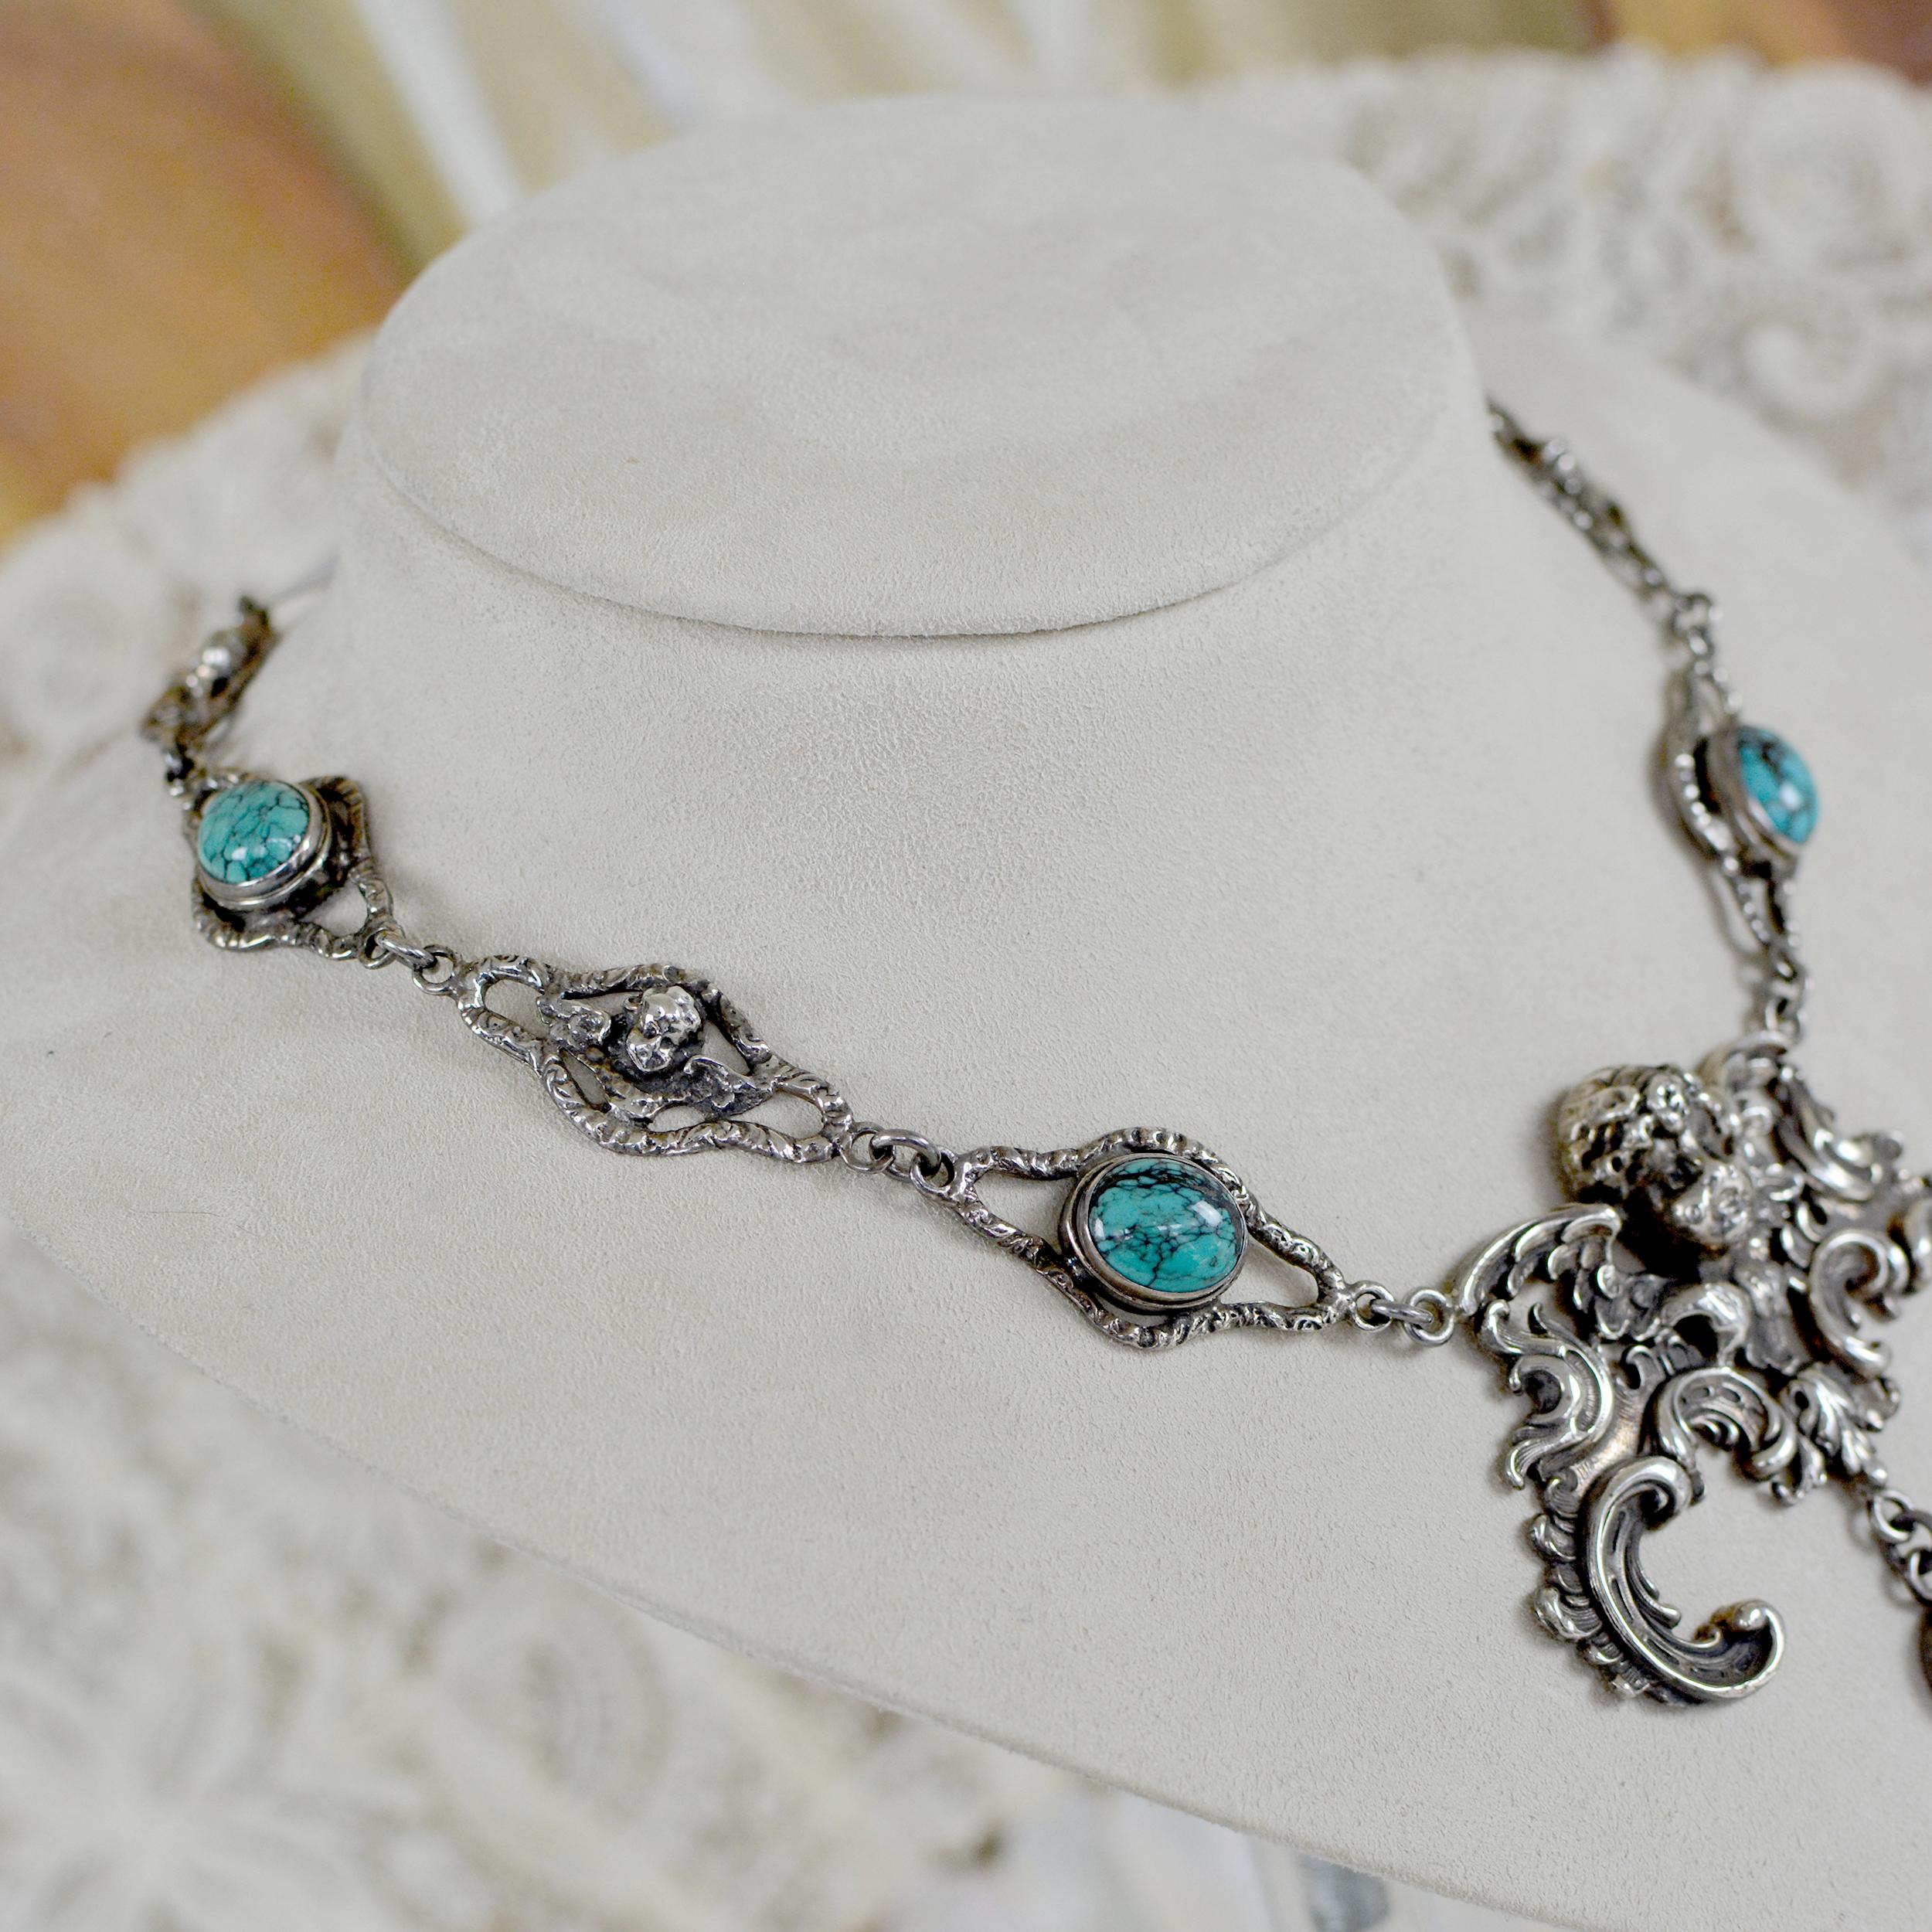 Jill Garber Divine Baroque Figural Angel Drop Necklace with Turquoise Cabochons In New Condition For Sale In Saginaw, MI